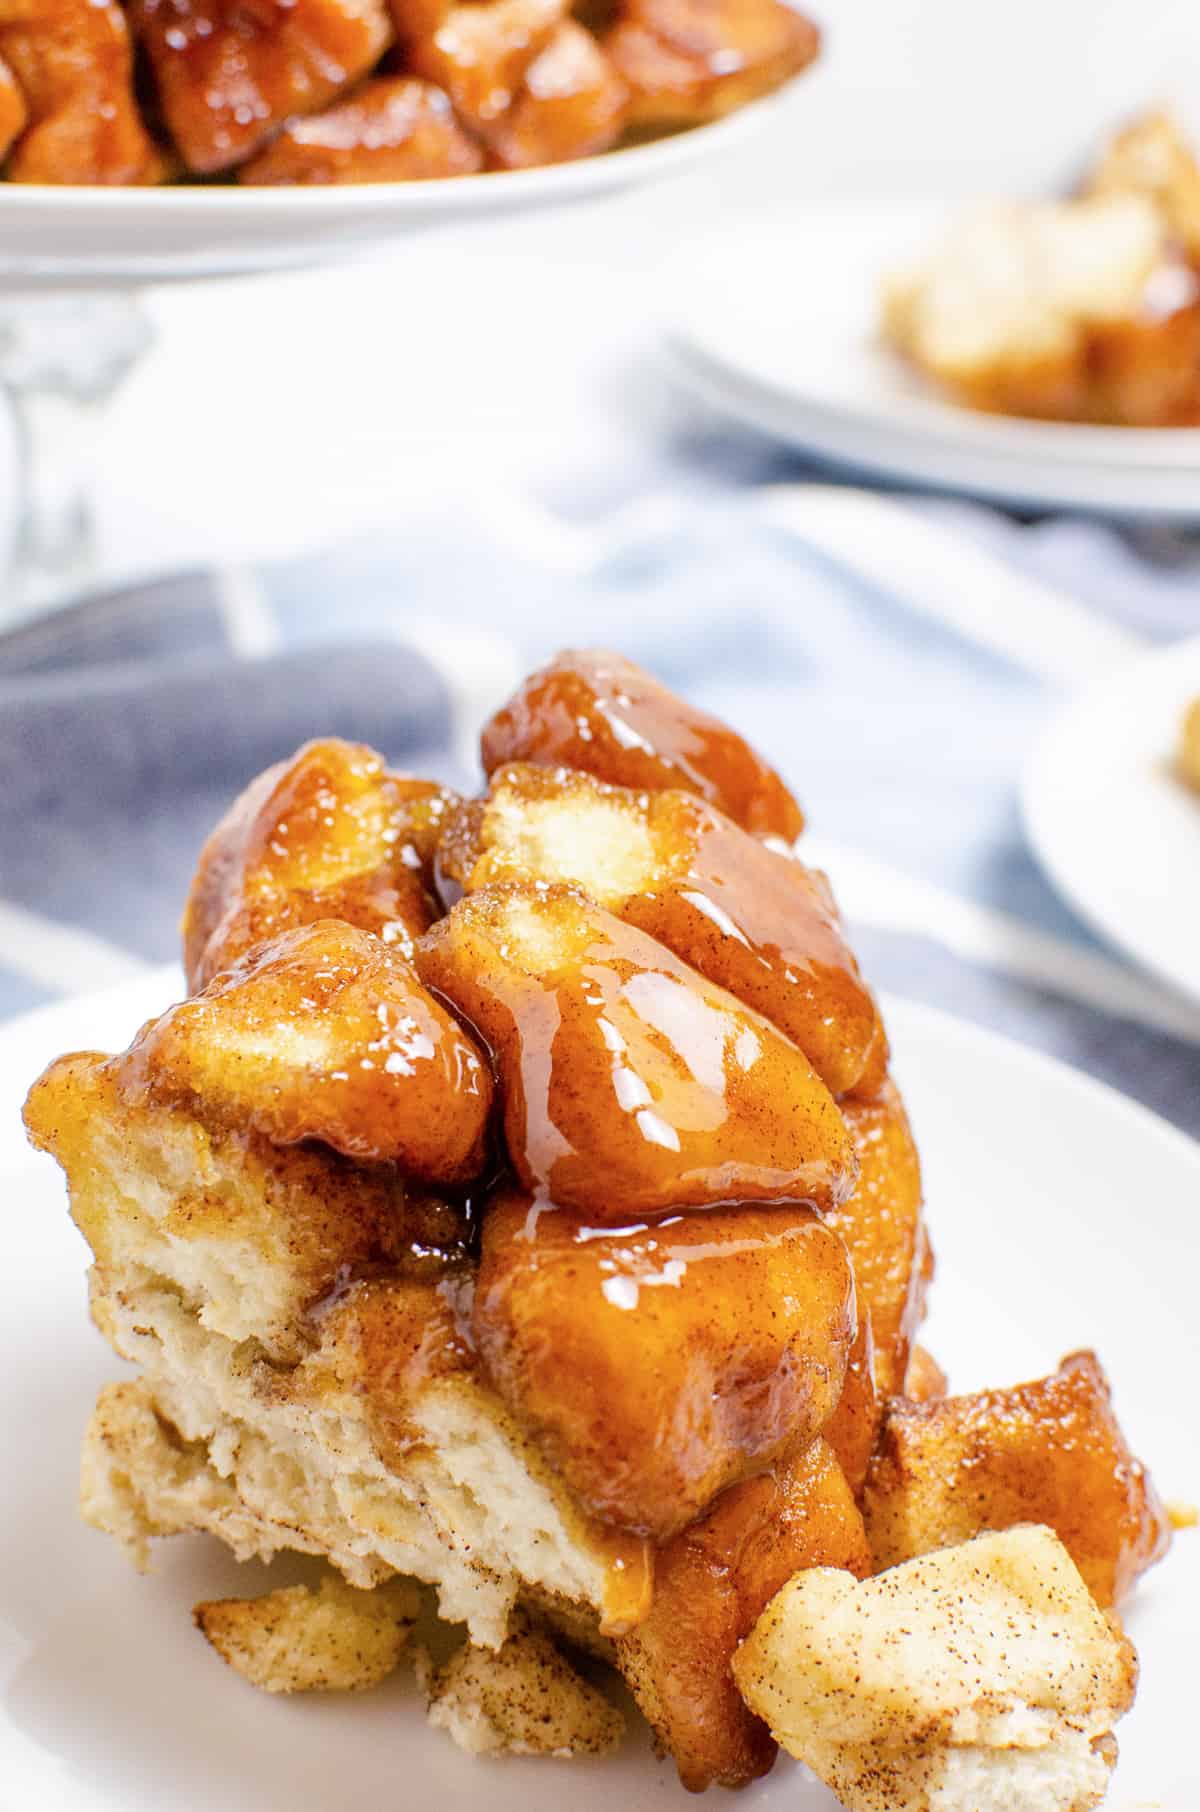 Chunk of monkey bread on white plate 